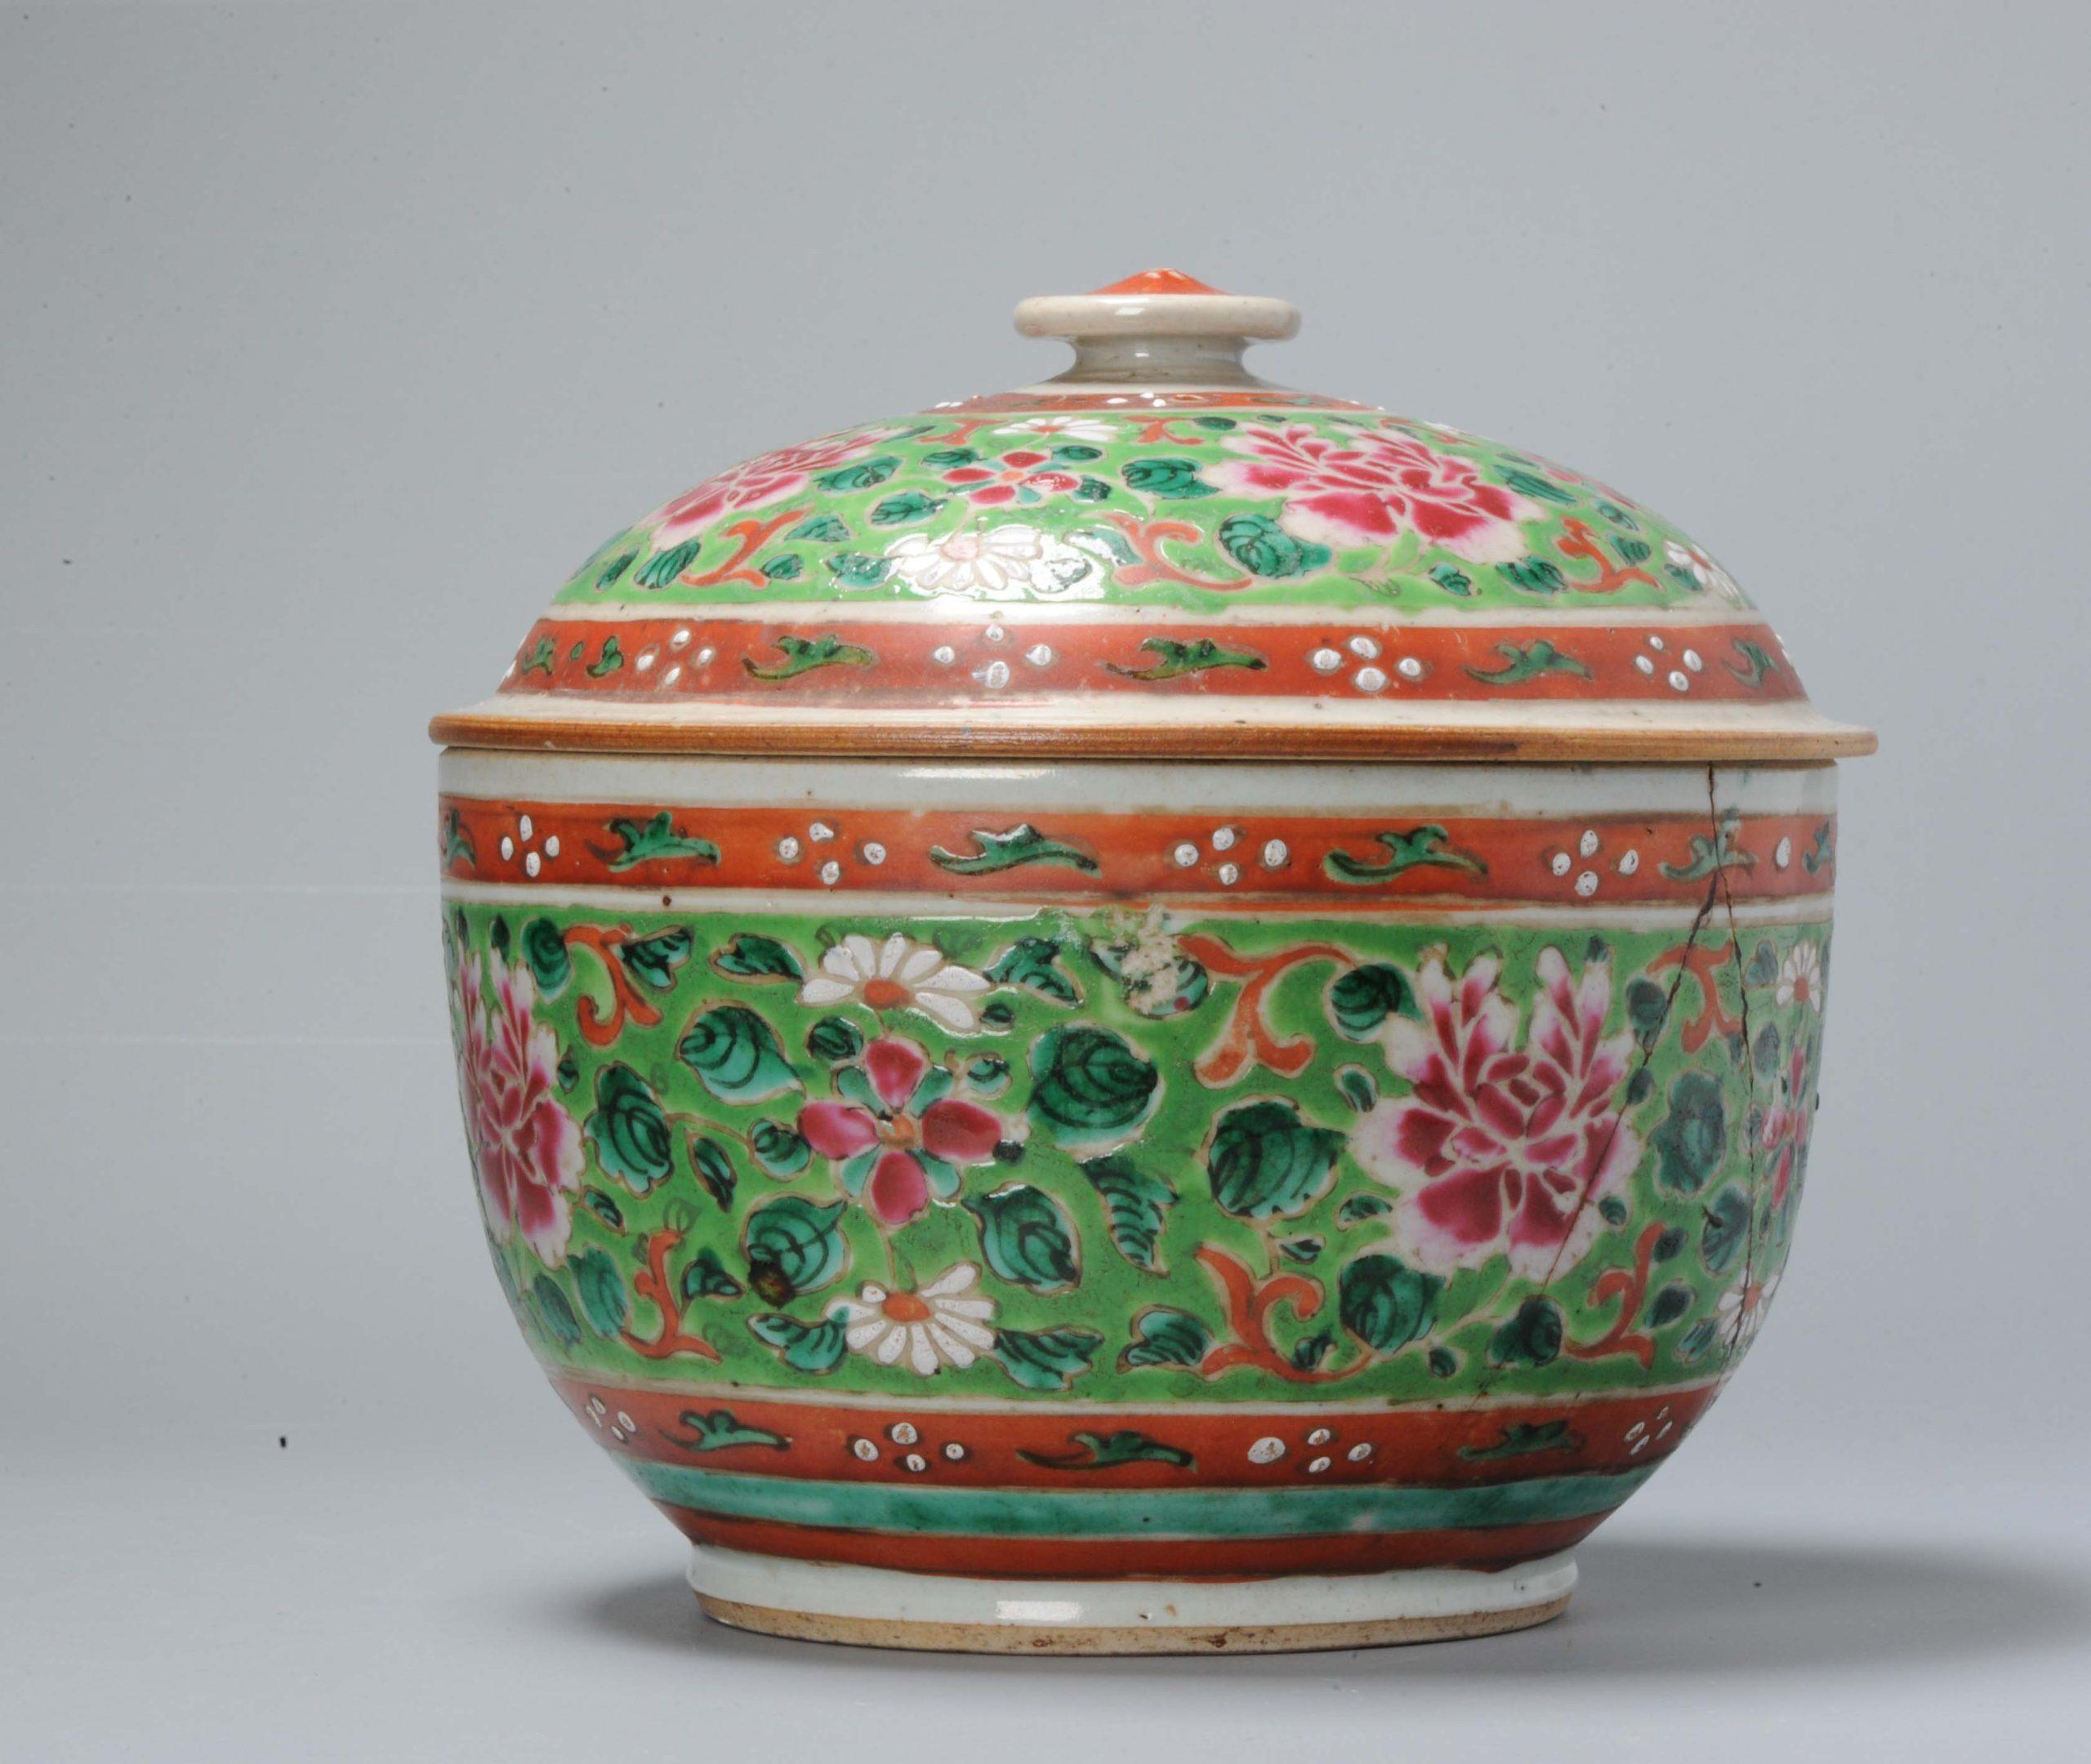 19th Century Antique 18/19 Century Chinese Porcelain Thai Bencharong Jar with Flowers Green